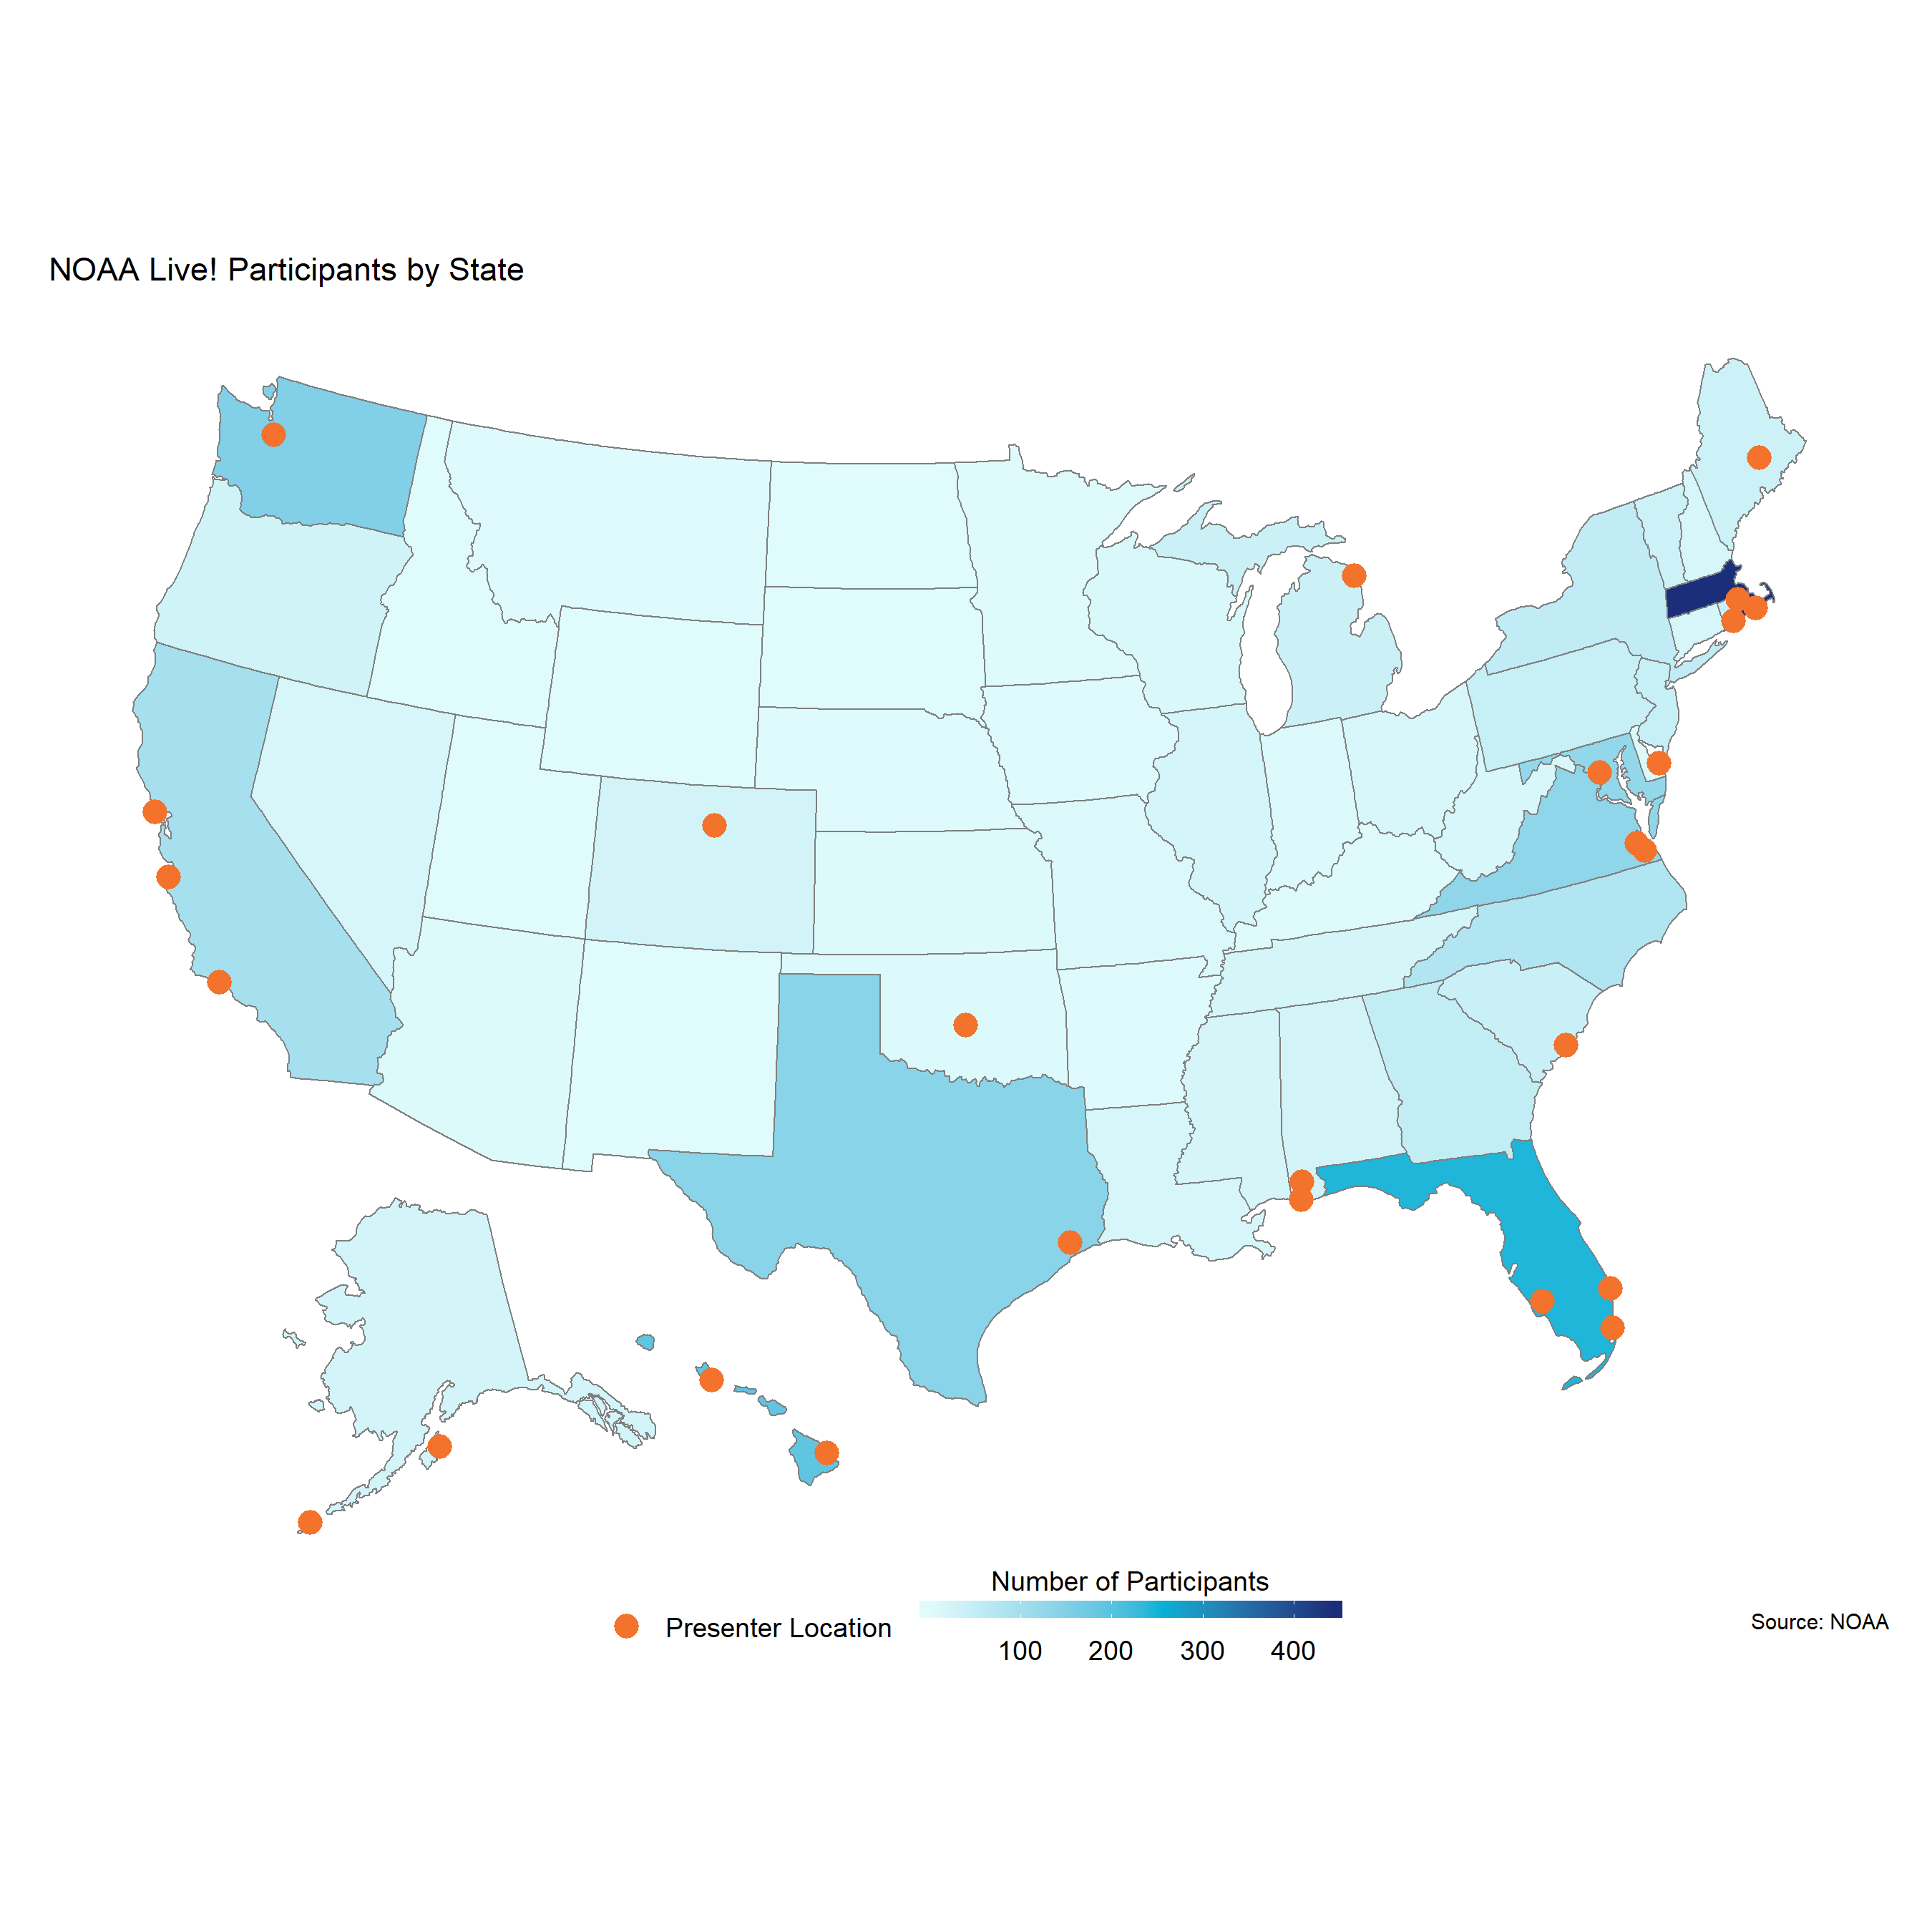 A map of the United States shows webinar participation from around the country. Orange dots show where the webinar presenters were located, and the different shades of blue show the number of participants from each state throughout the webinar series for which location information was collected.